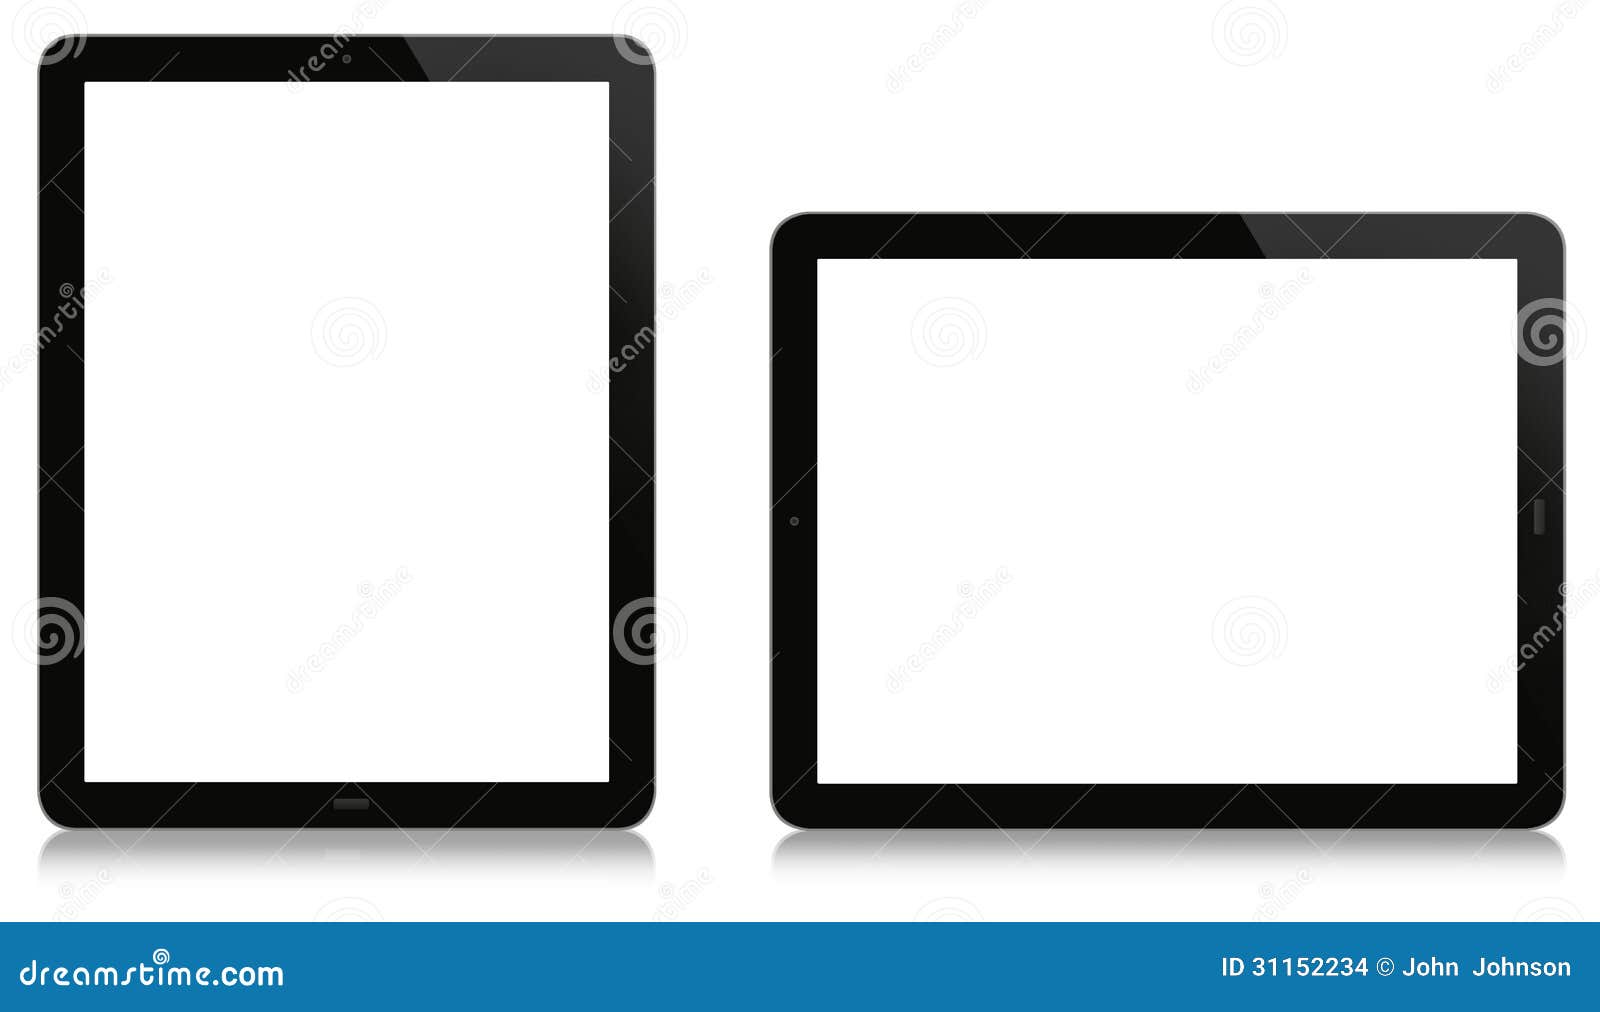 vertical and horizontal tablet